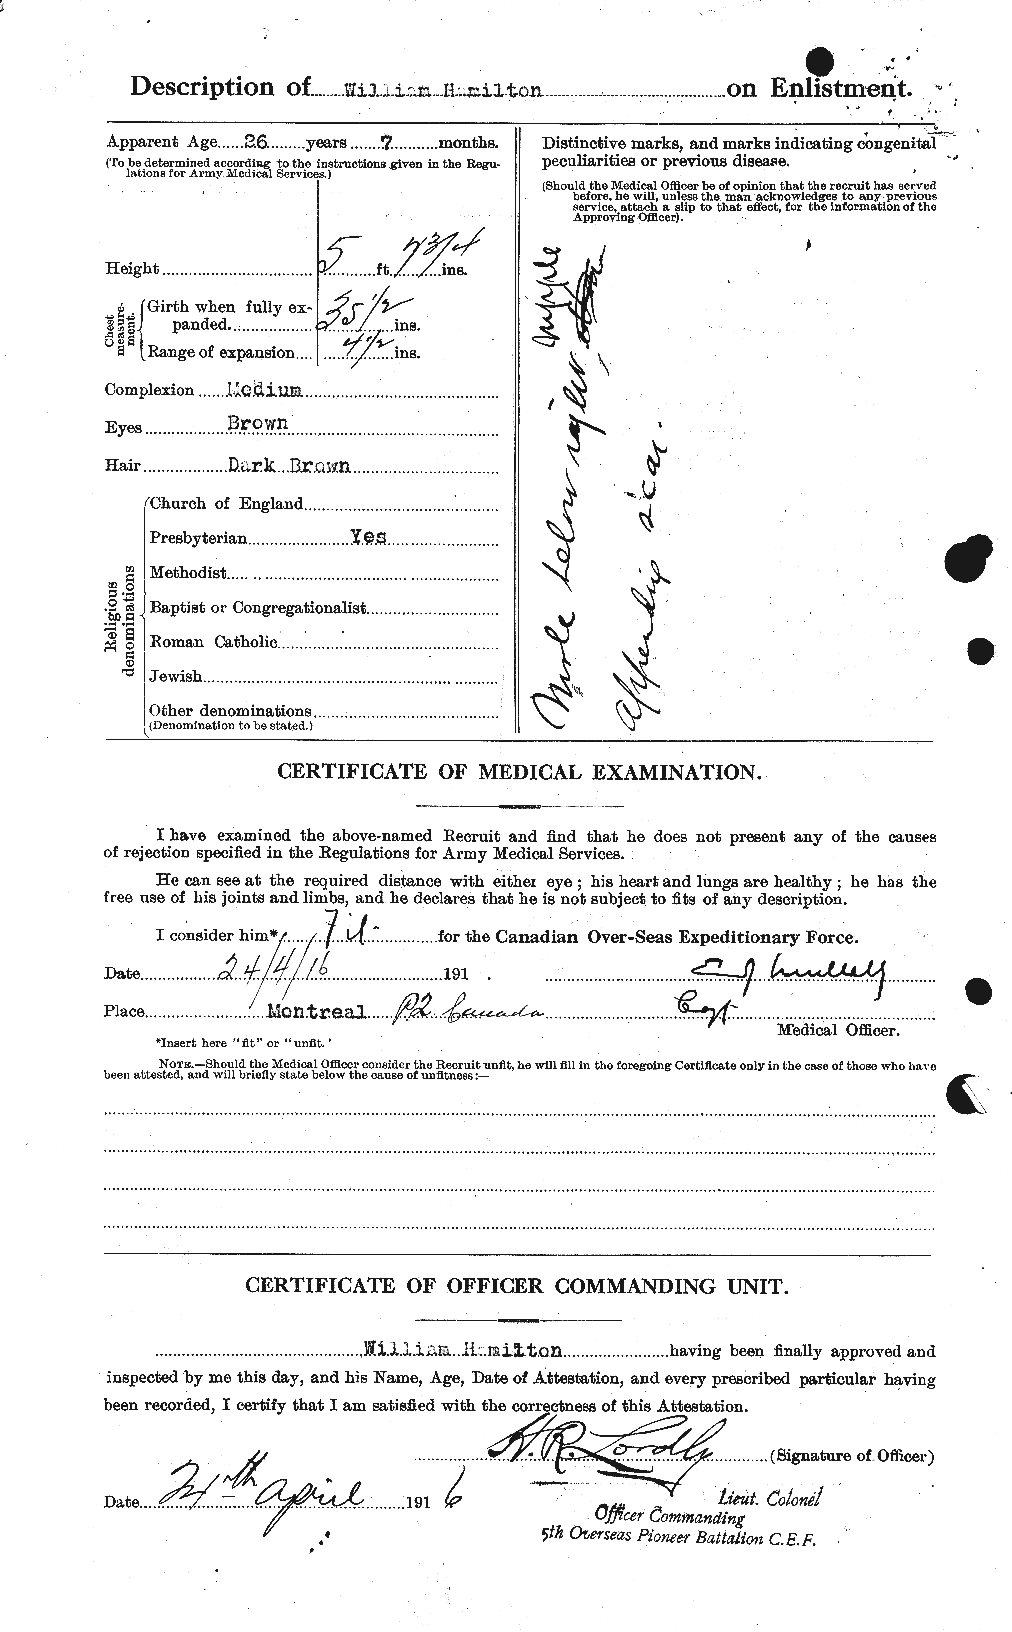 Personnel Records of the First World War - CEF 374840b